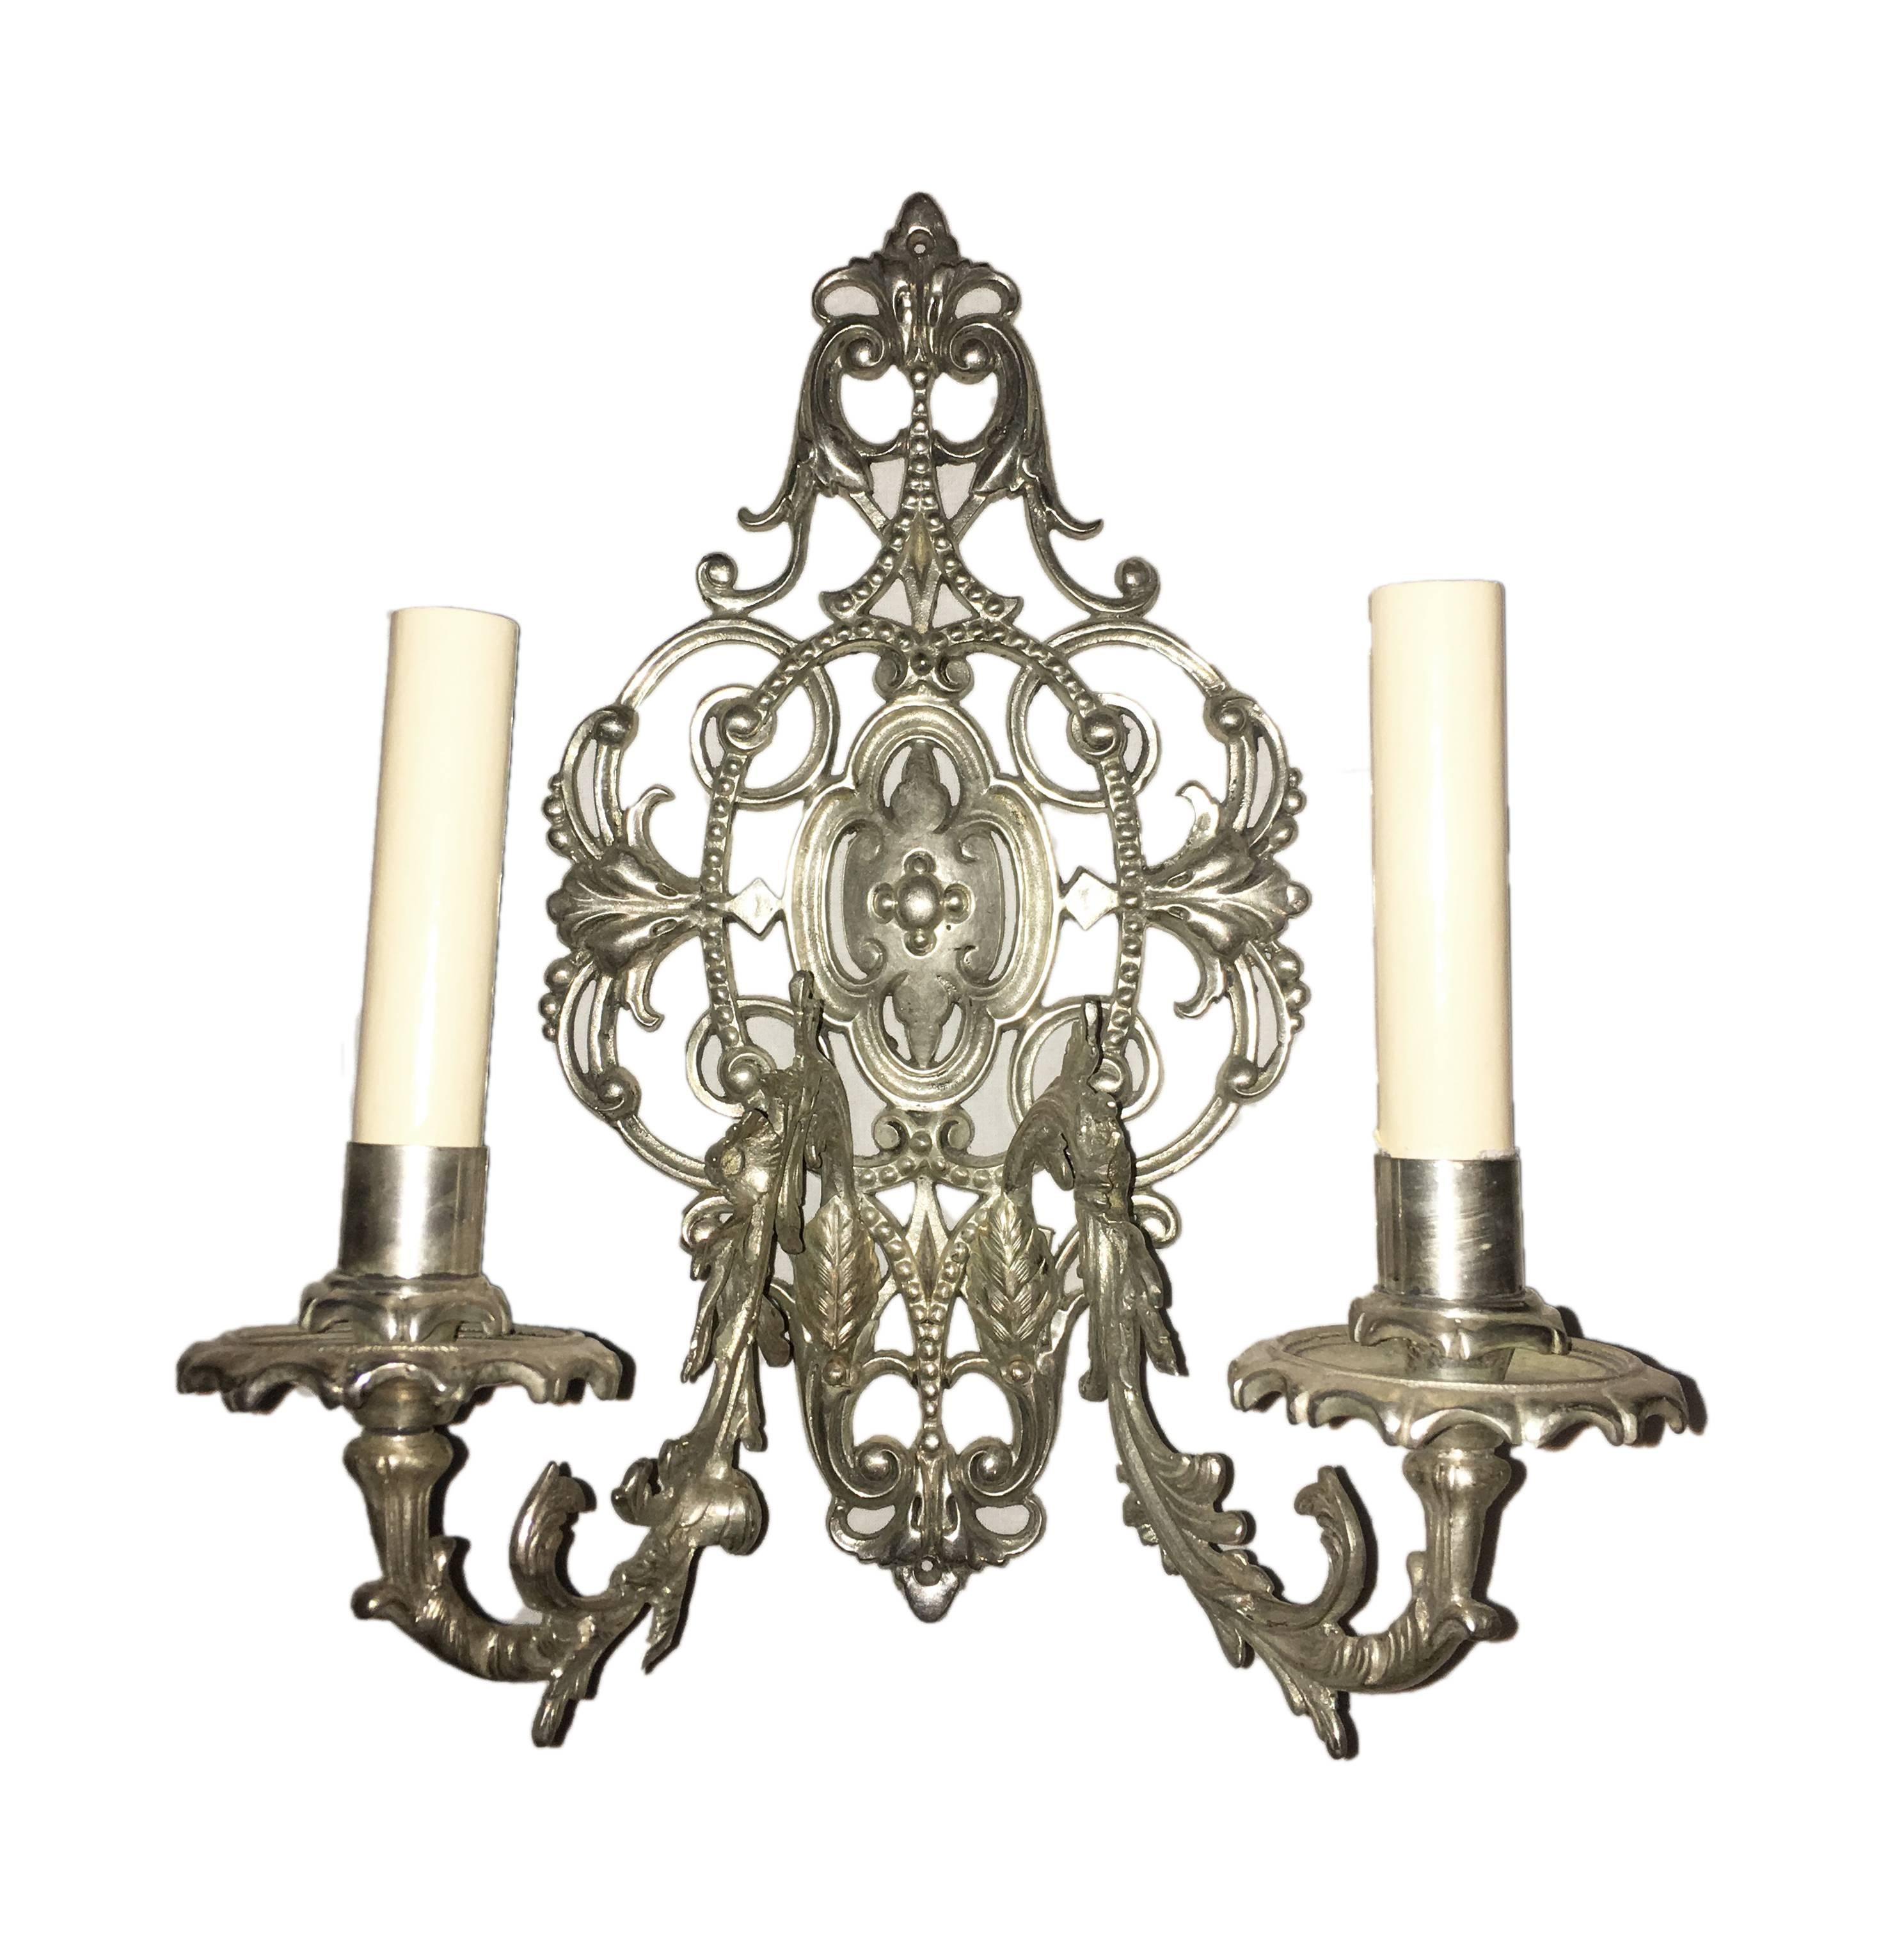 A set of eight circa 1920's English cast bronze sconces with a silver plated finish, foliage motif and original patina. Sold per pair.

Measurements:
Height: 14